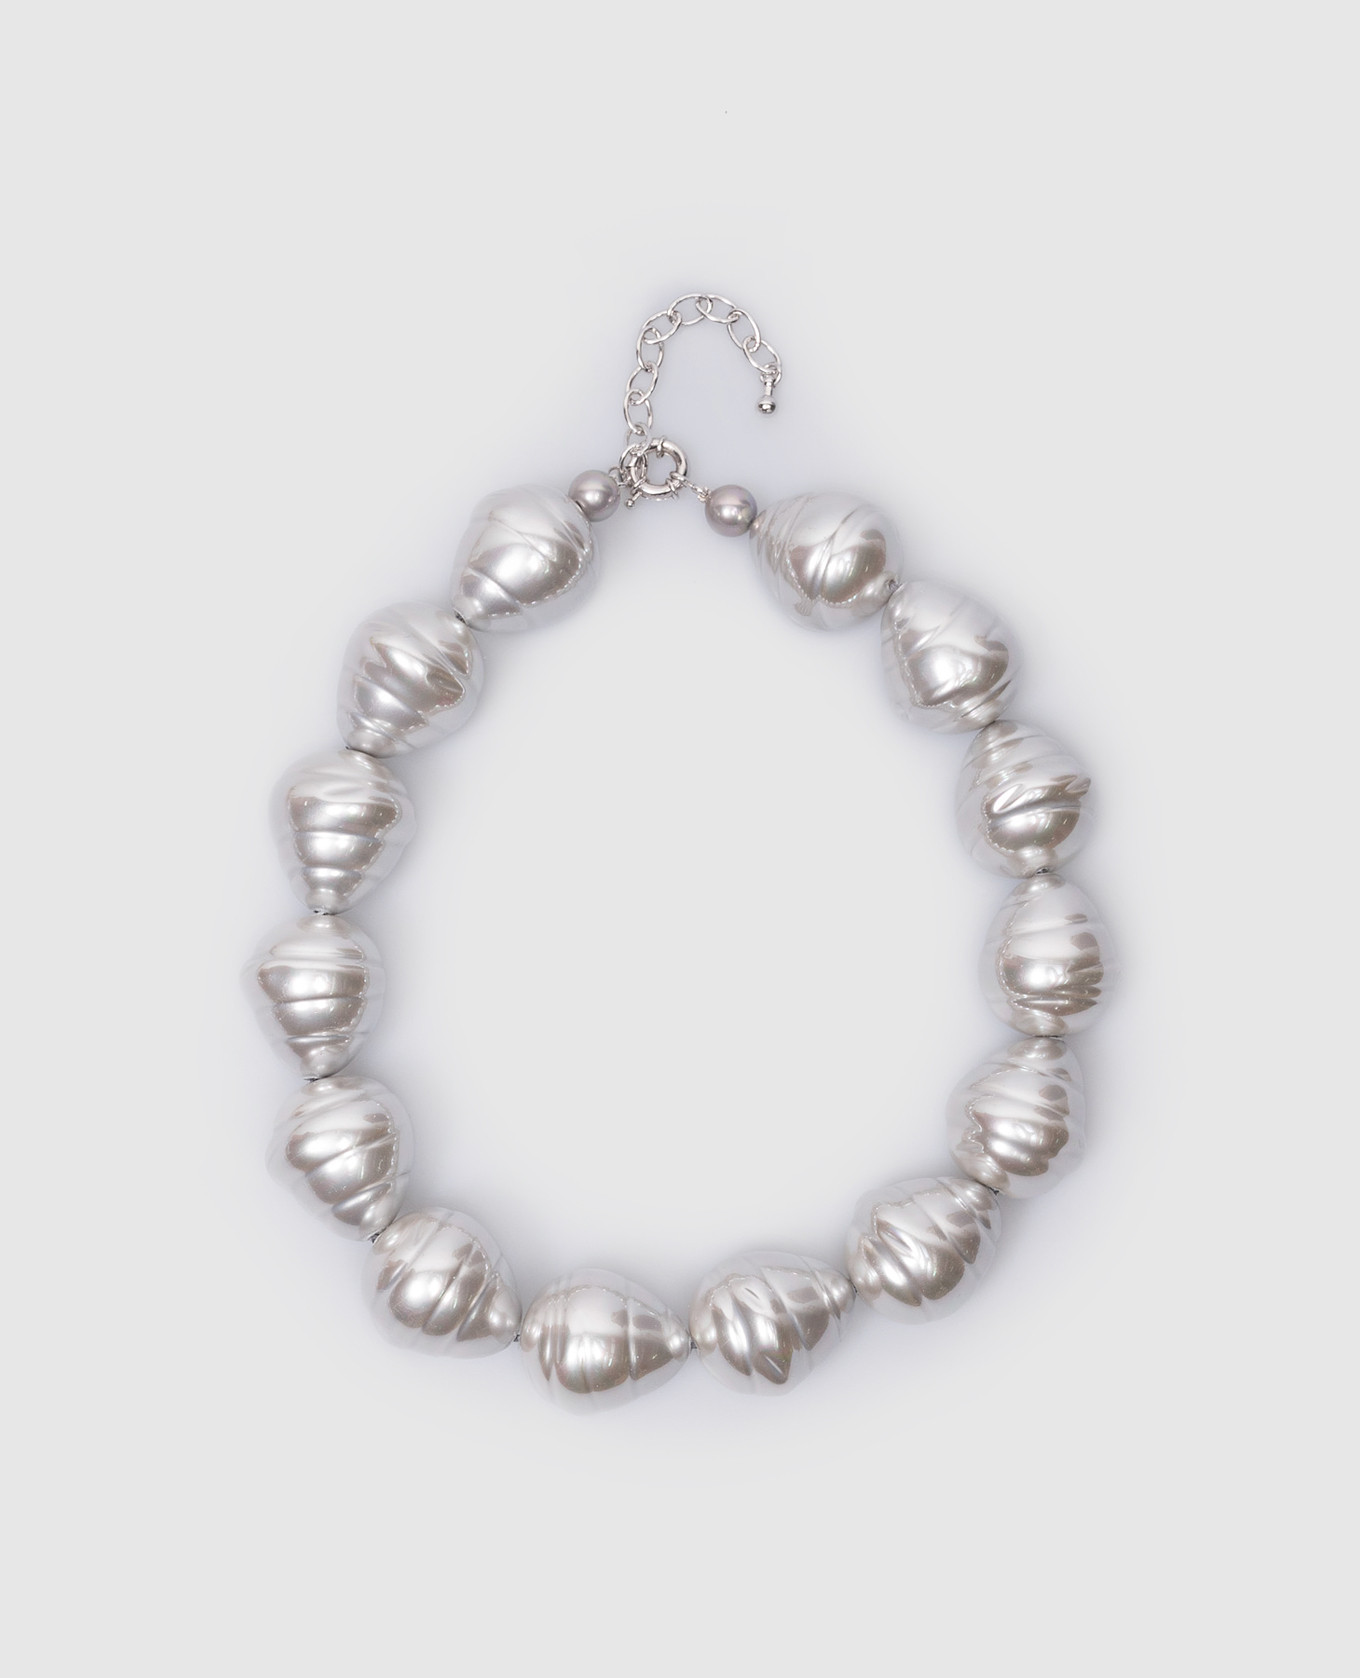 Gray necklace with asymmetrical beads